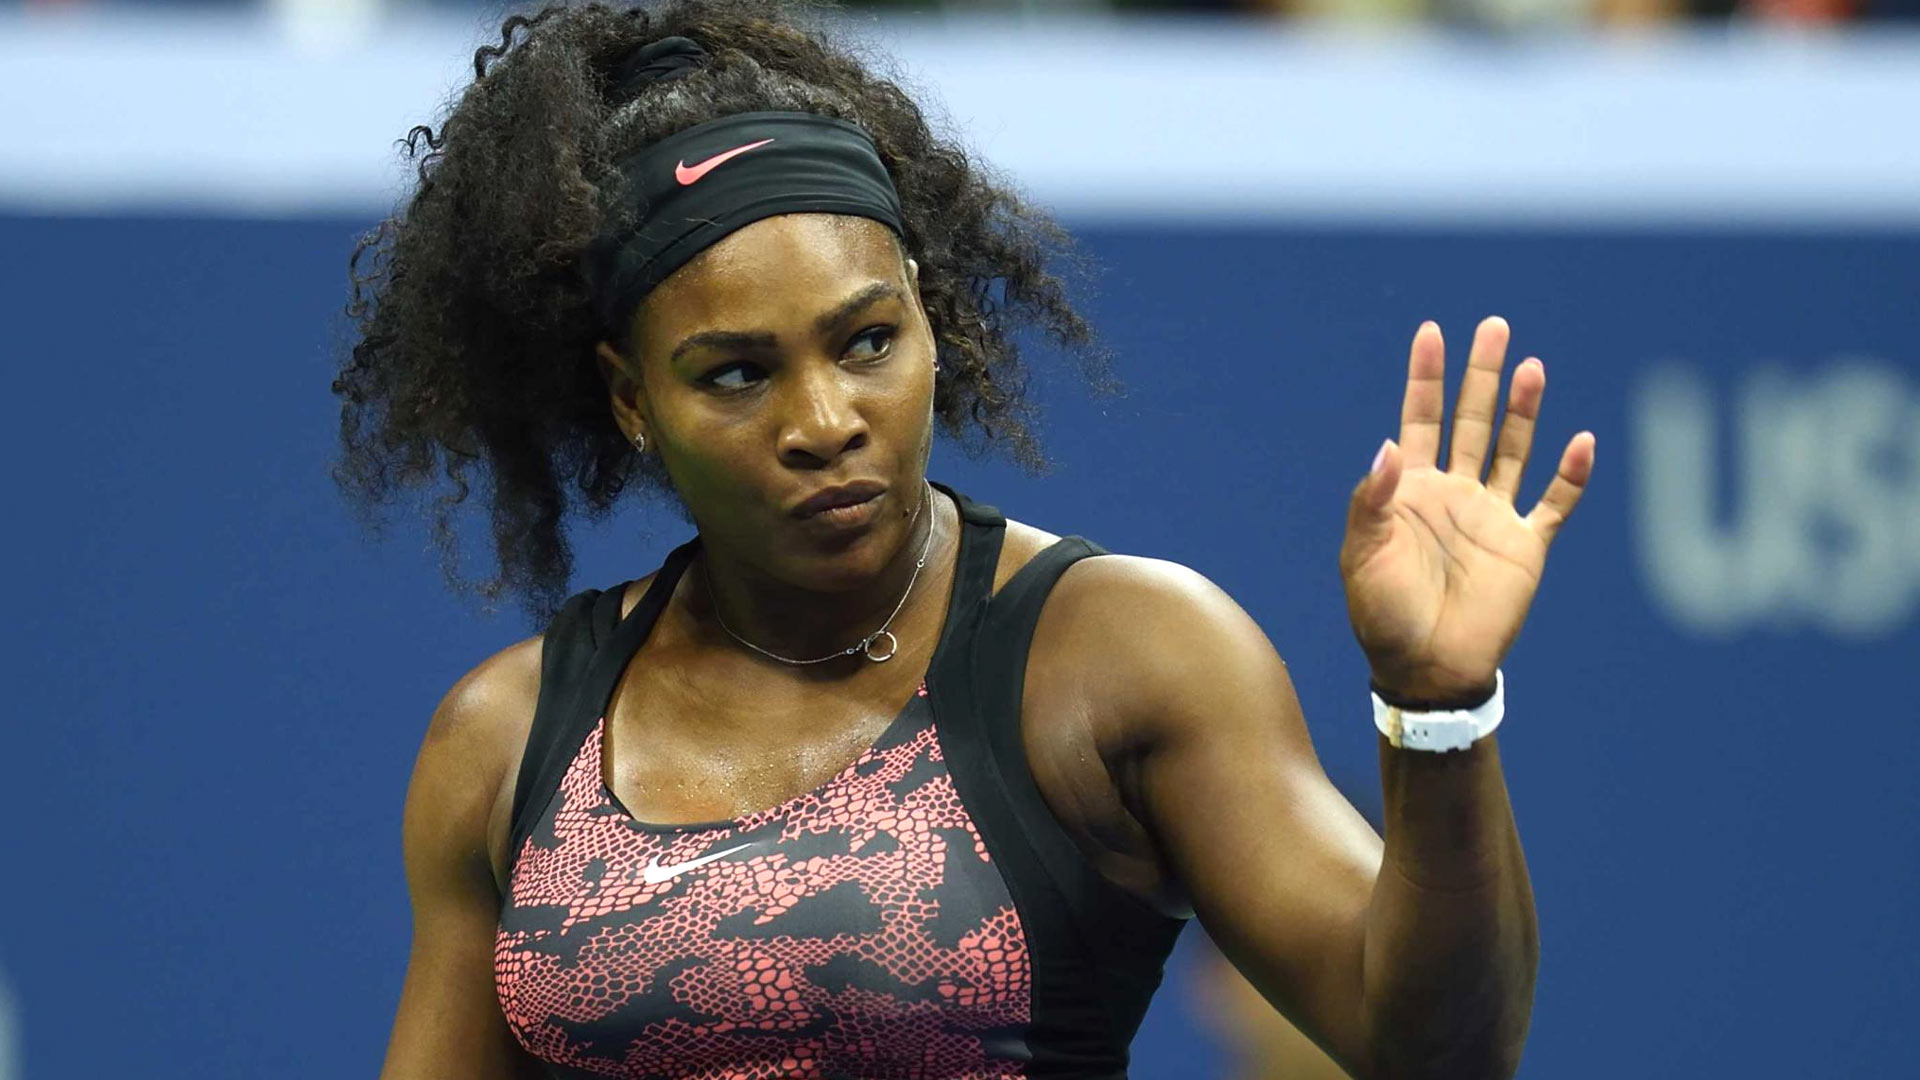 Serena williams us open 2015 Free full hd wallpapers for 1080p